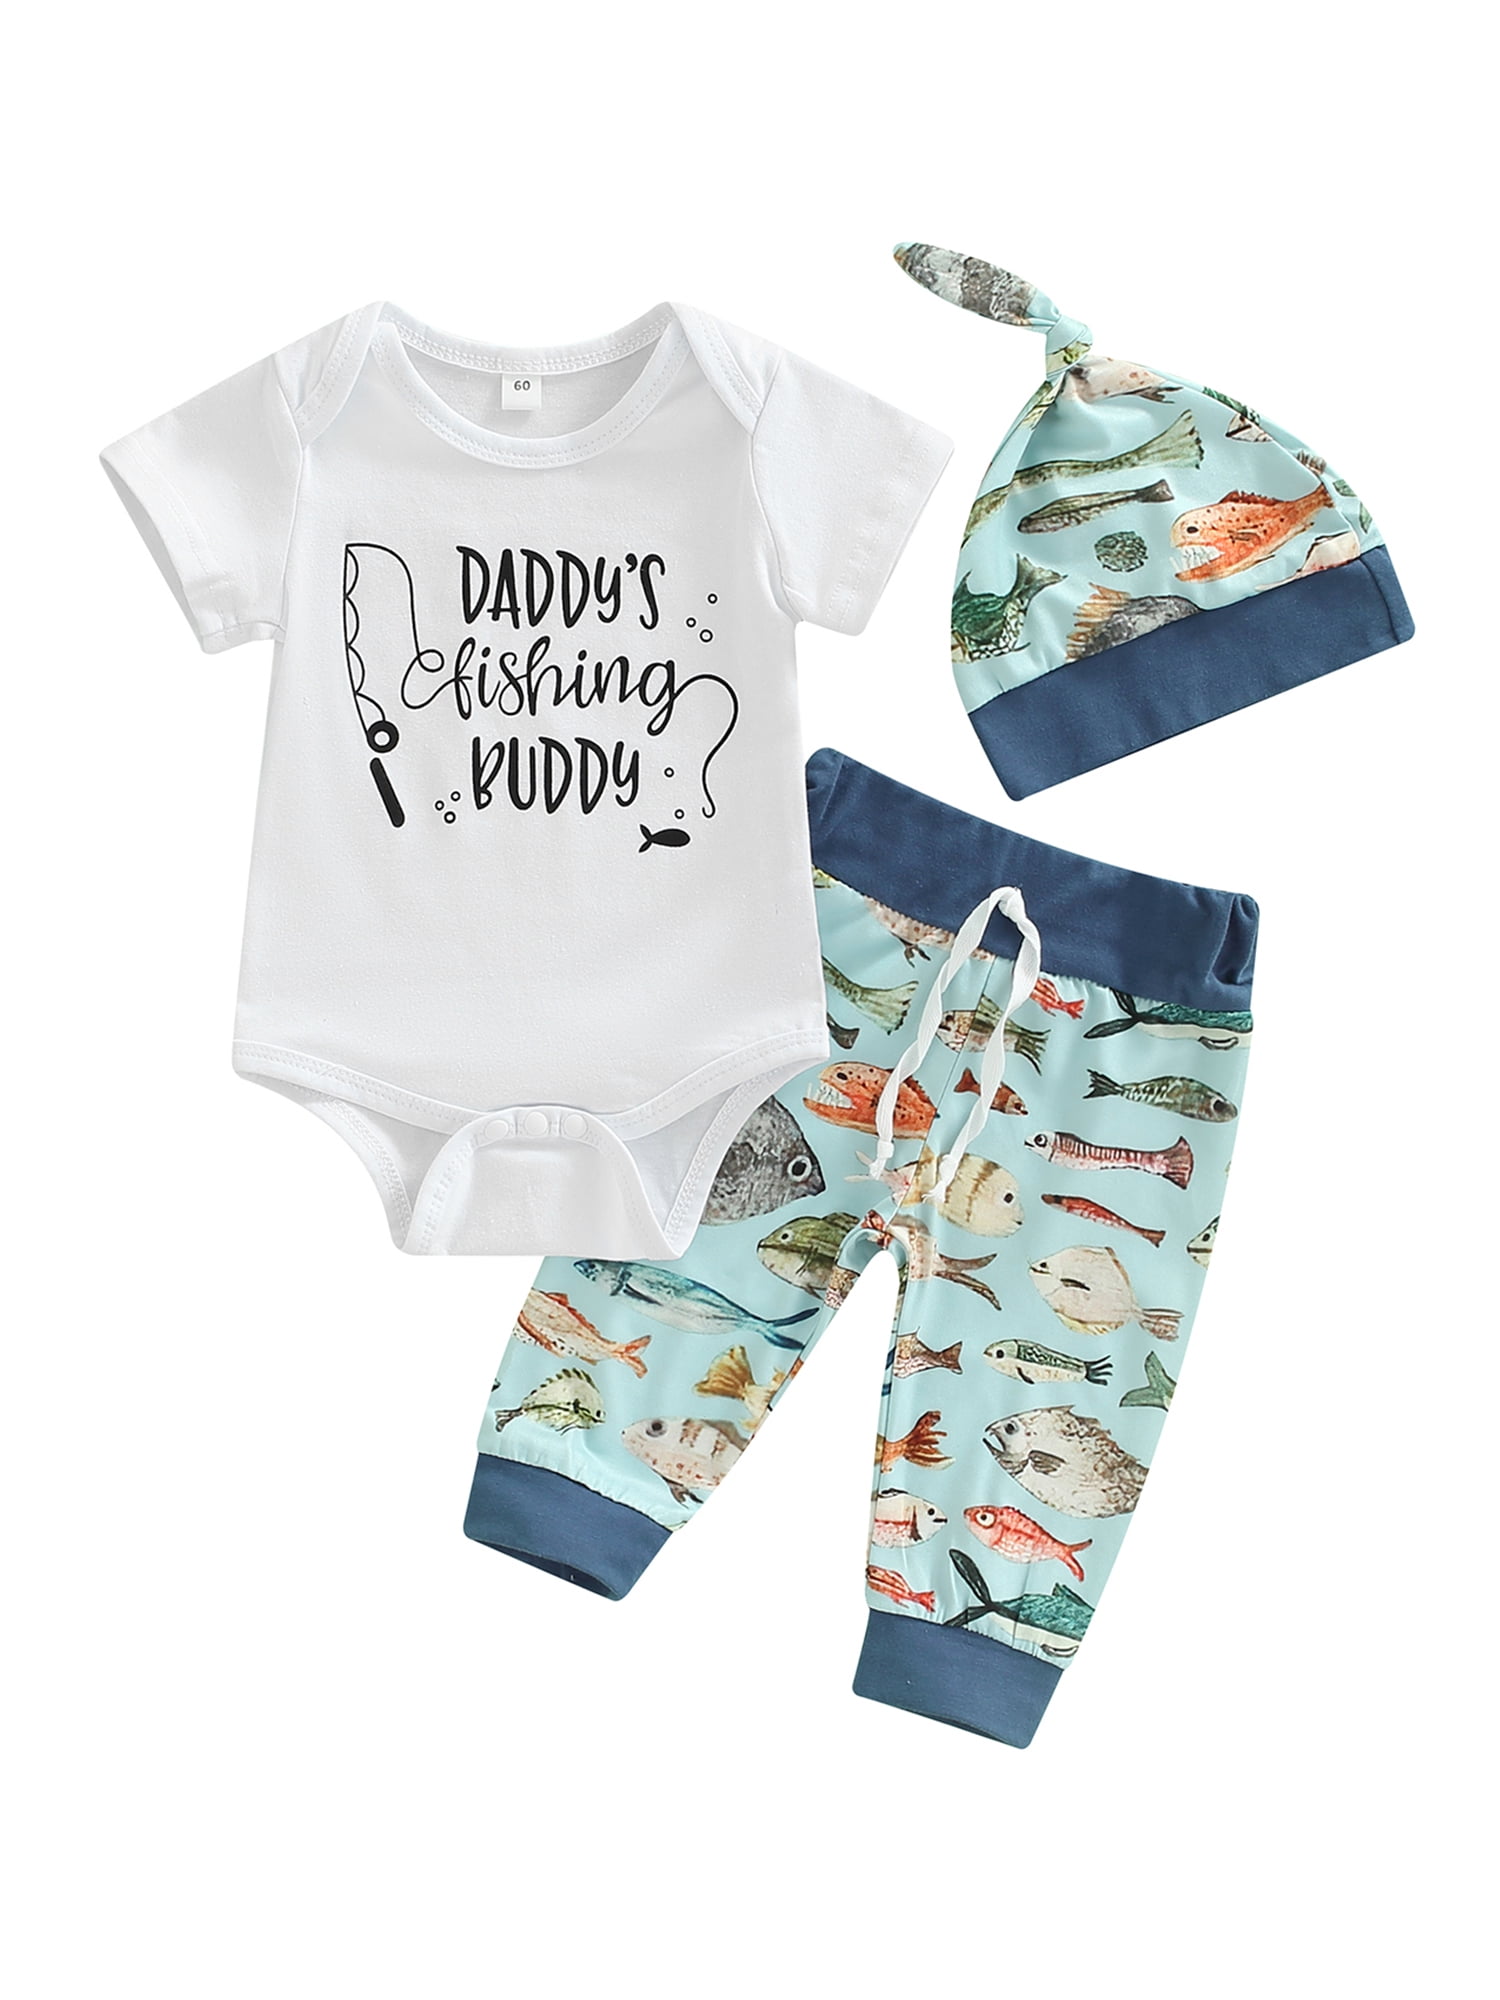 Peyakidsaa Infant Baby Boy Daddy's Fishing Buddy Romper Bodysuit and Fish  Pants Outfit Set 